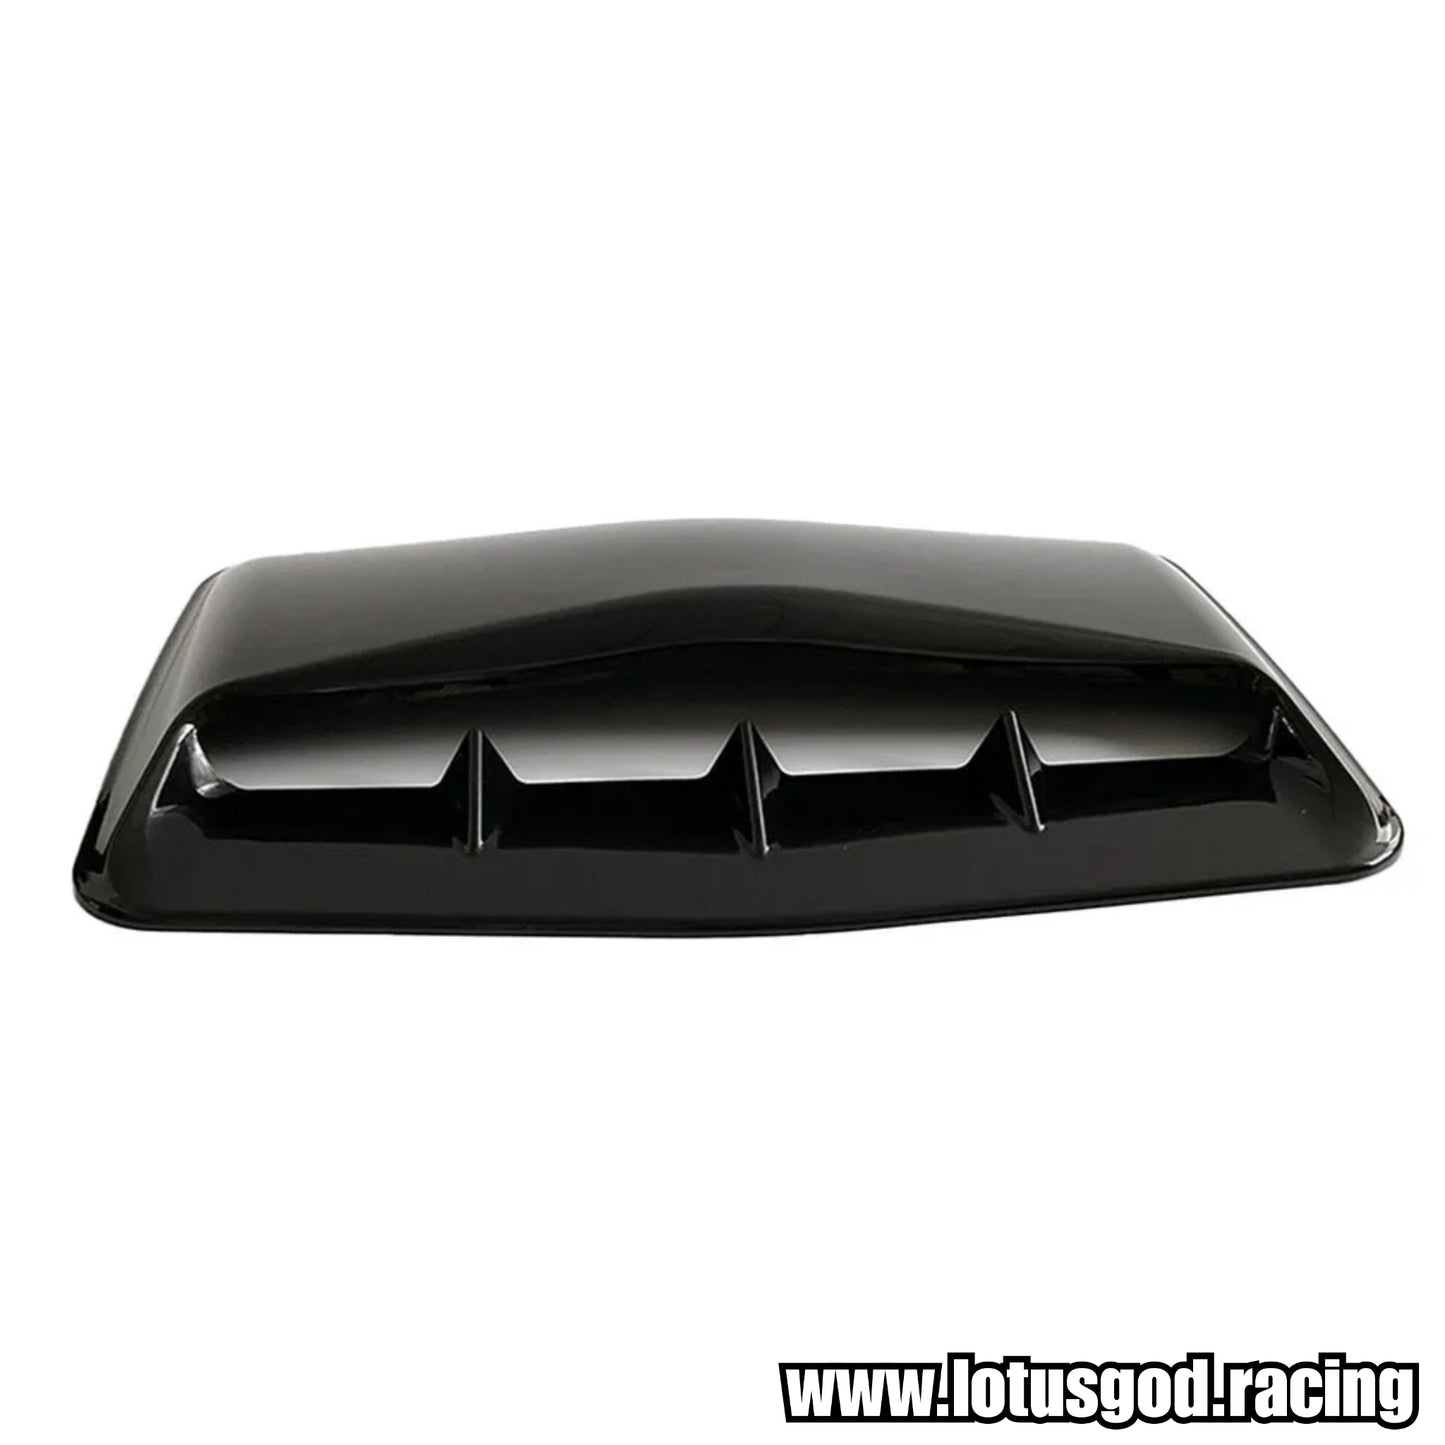 Front Bonnet Scoop Hood Vents Universal Air Intake Flow Outlet Wing Trim  Sticker Cover Decorations Exterior Car Accessories - AliExpress